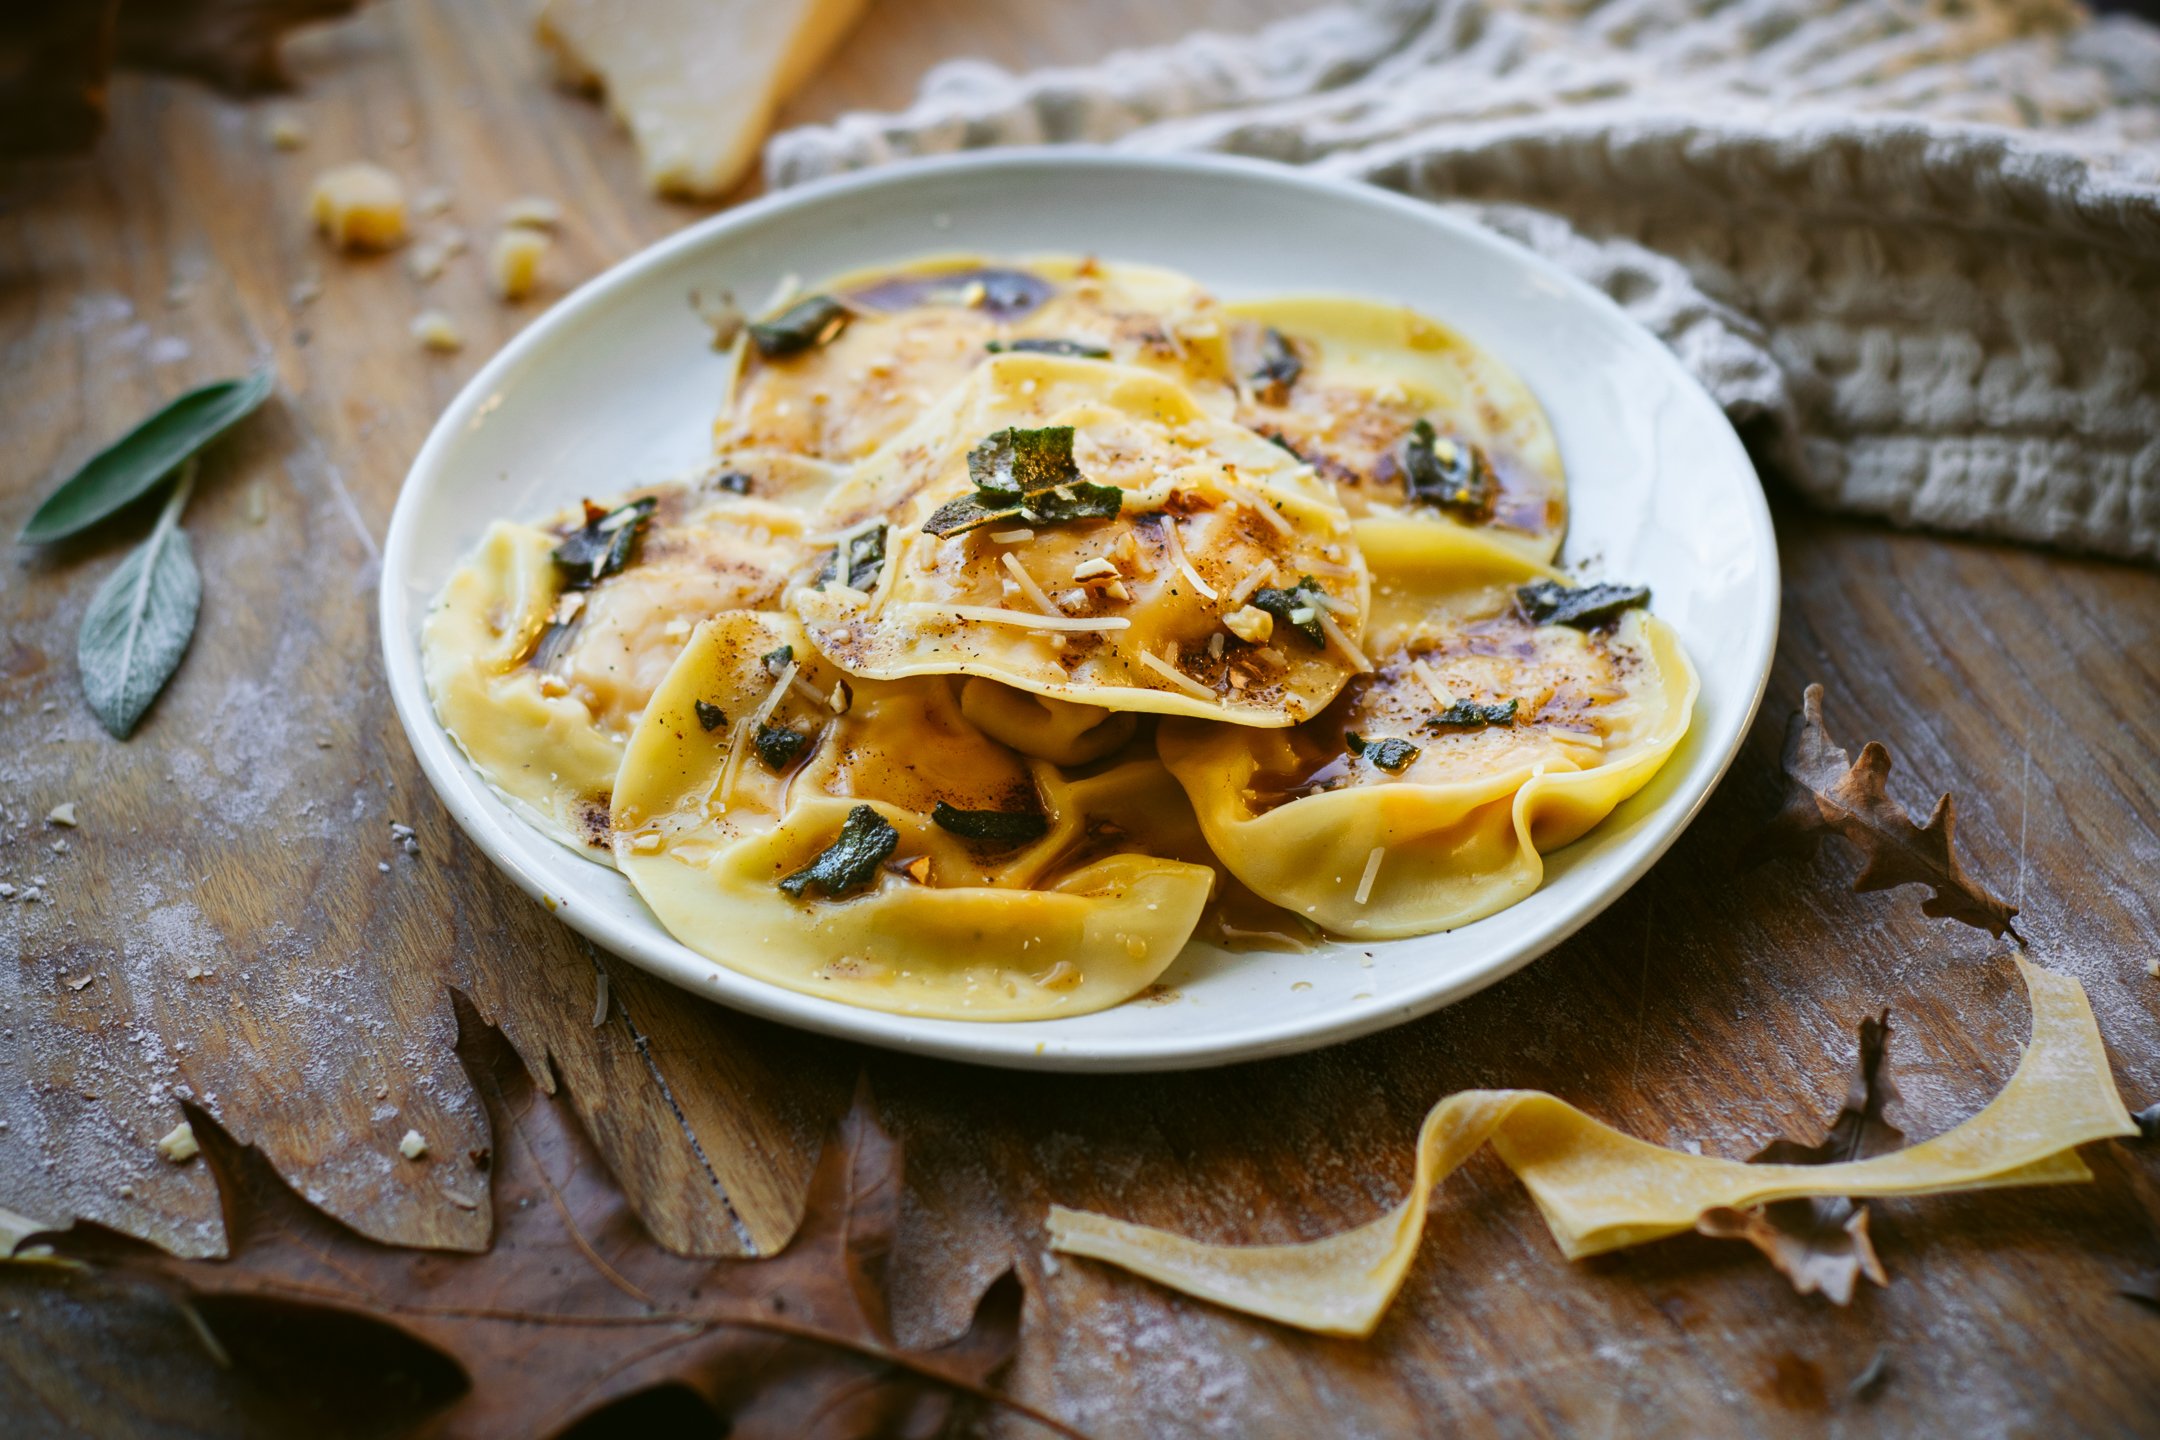 A plate of pumpkin ravioli on a wooden background